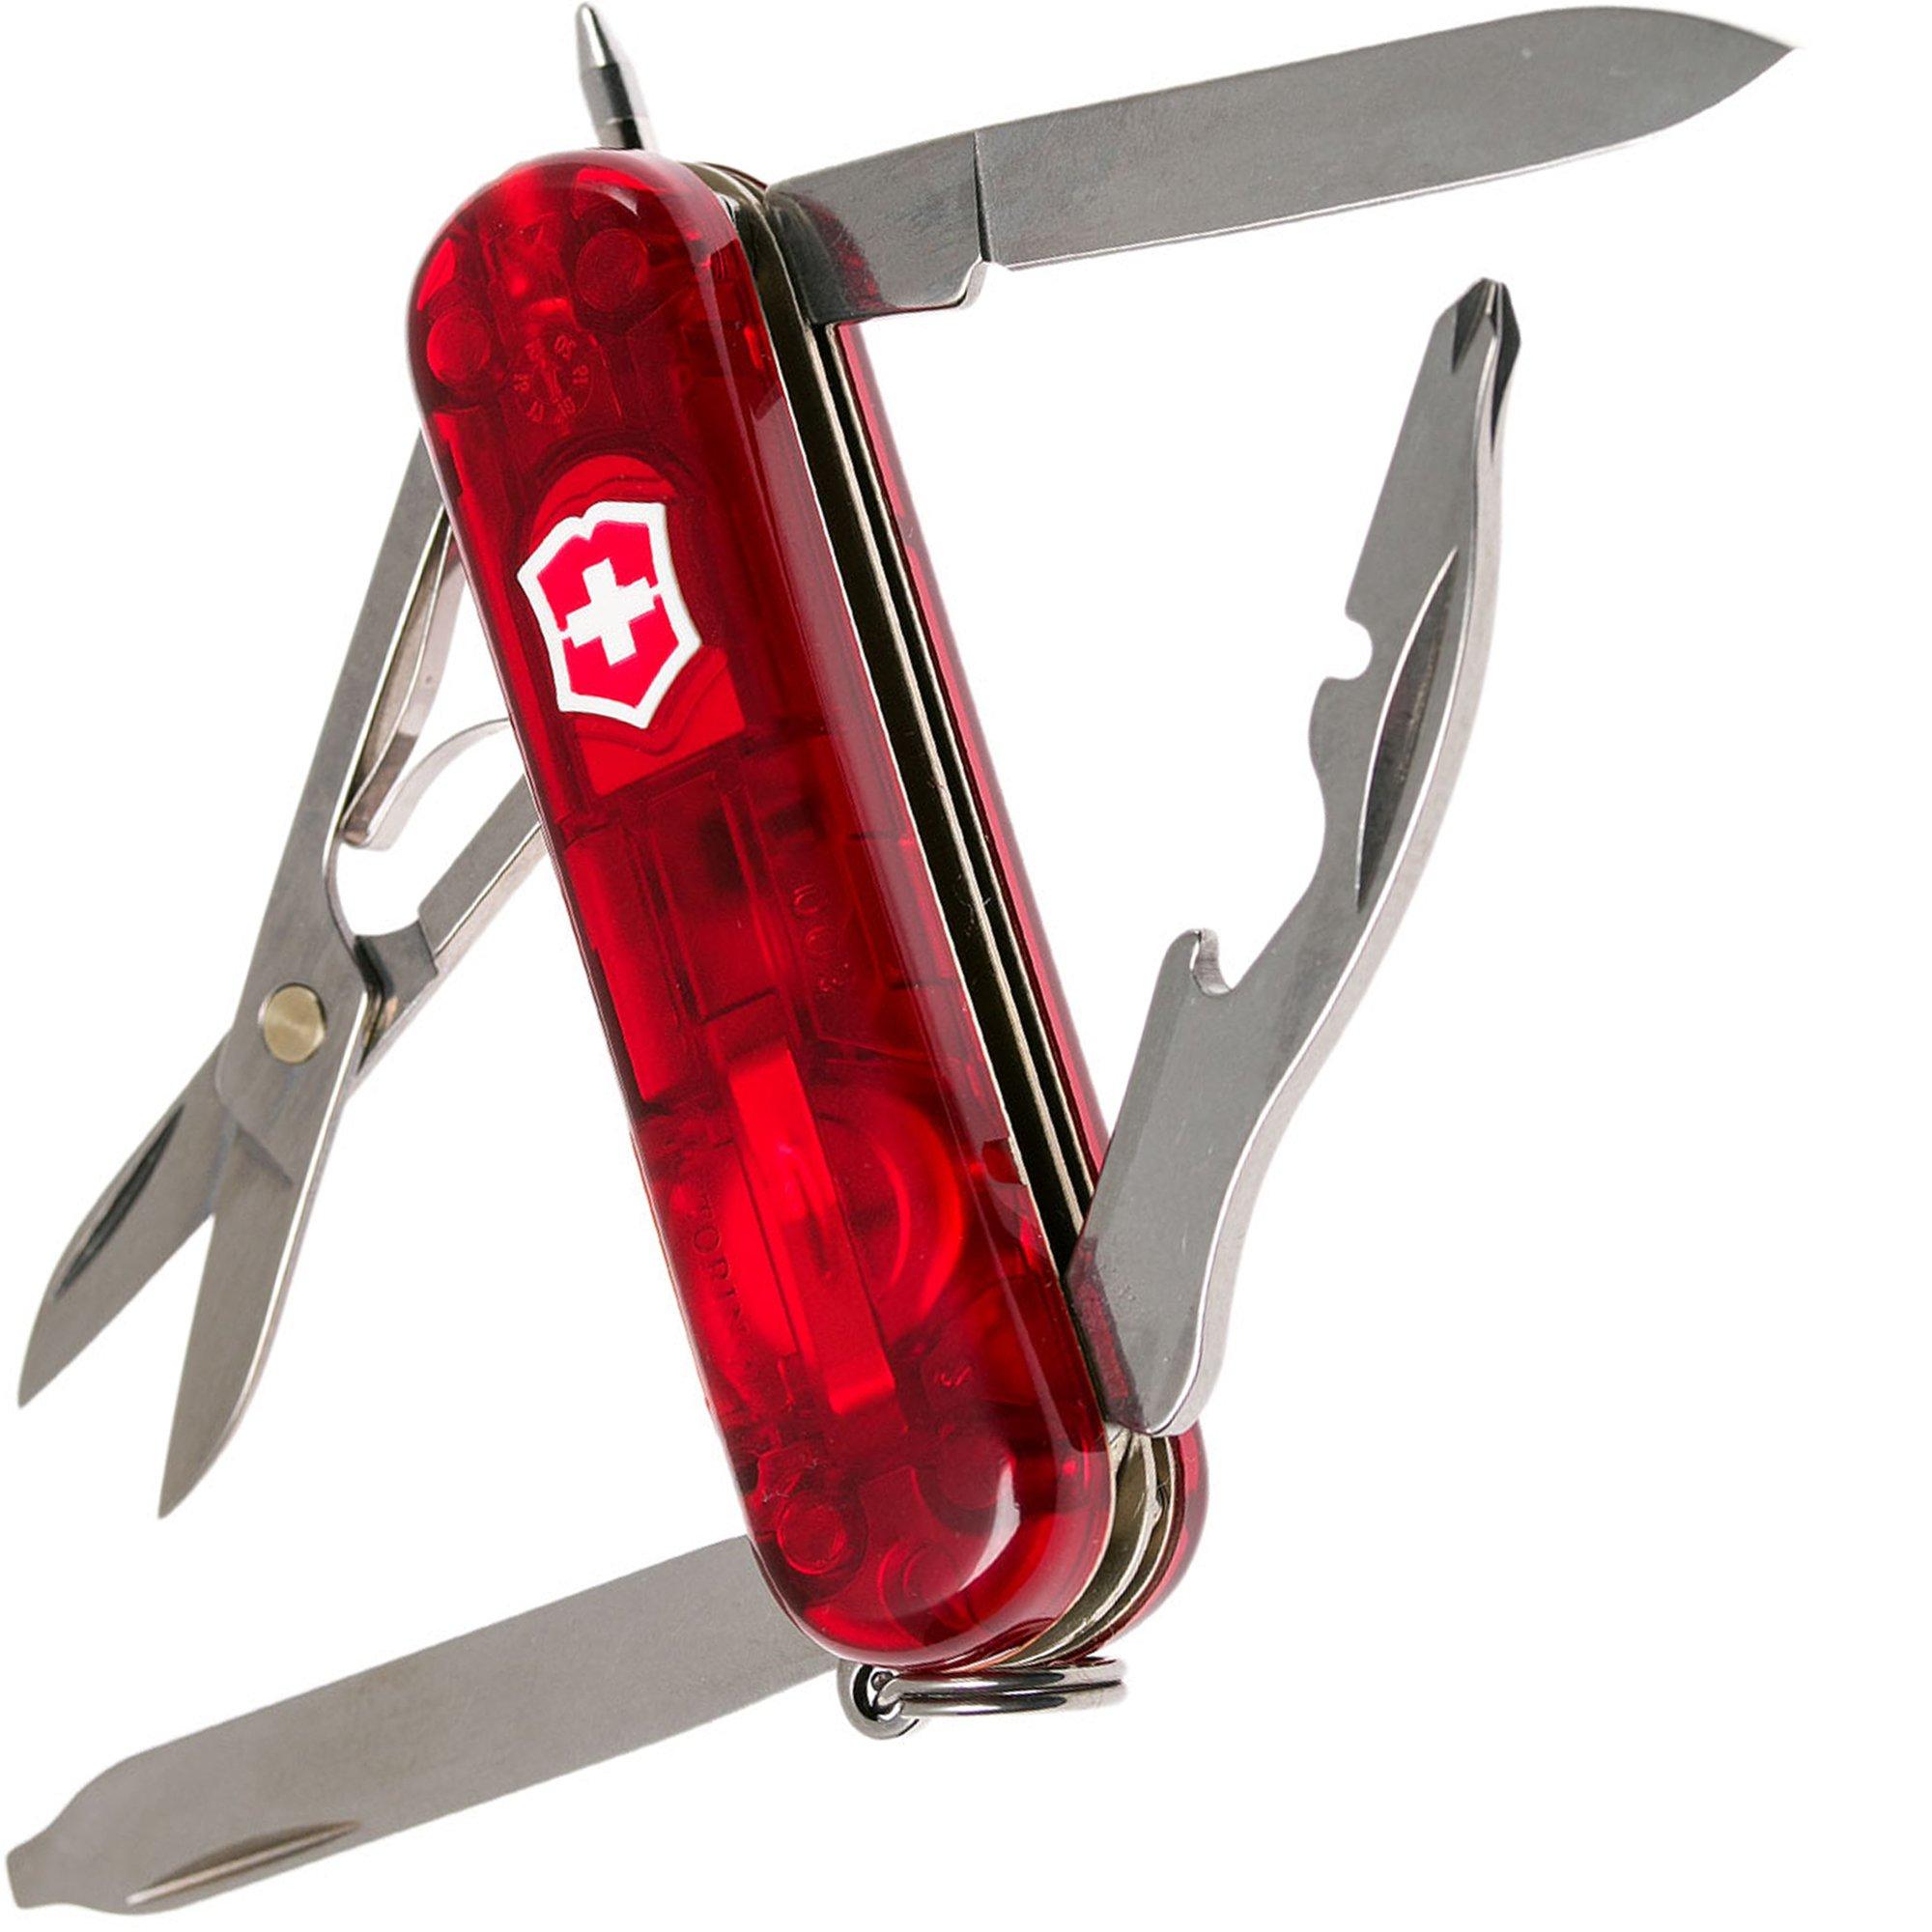  Victorinox Swiss Army Signature Collection Pocket Knife Red 58  mm